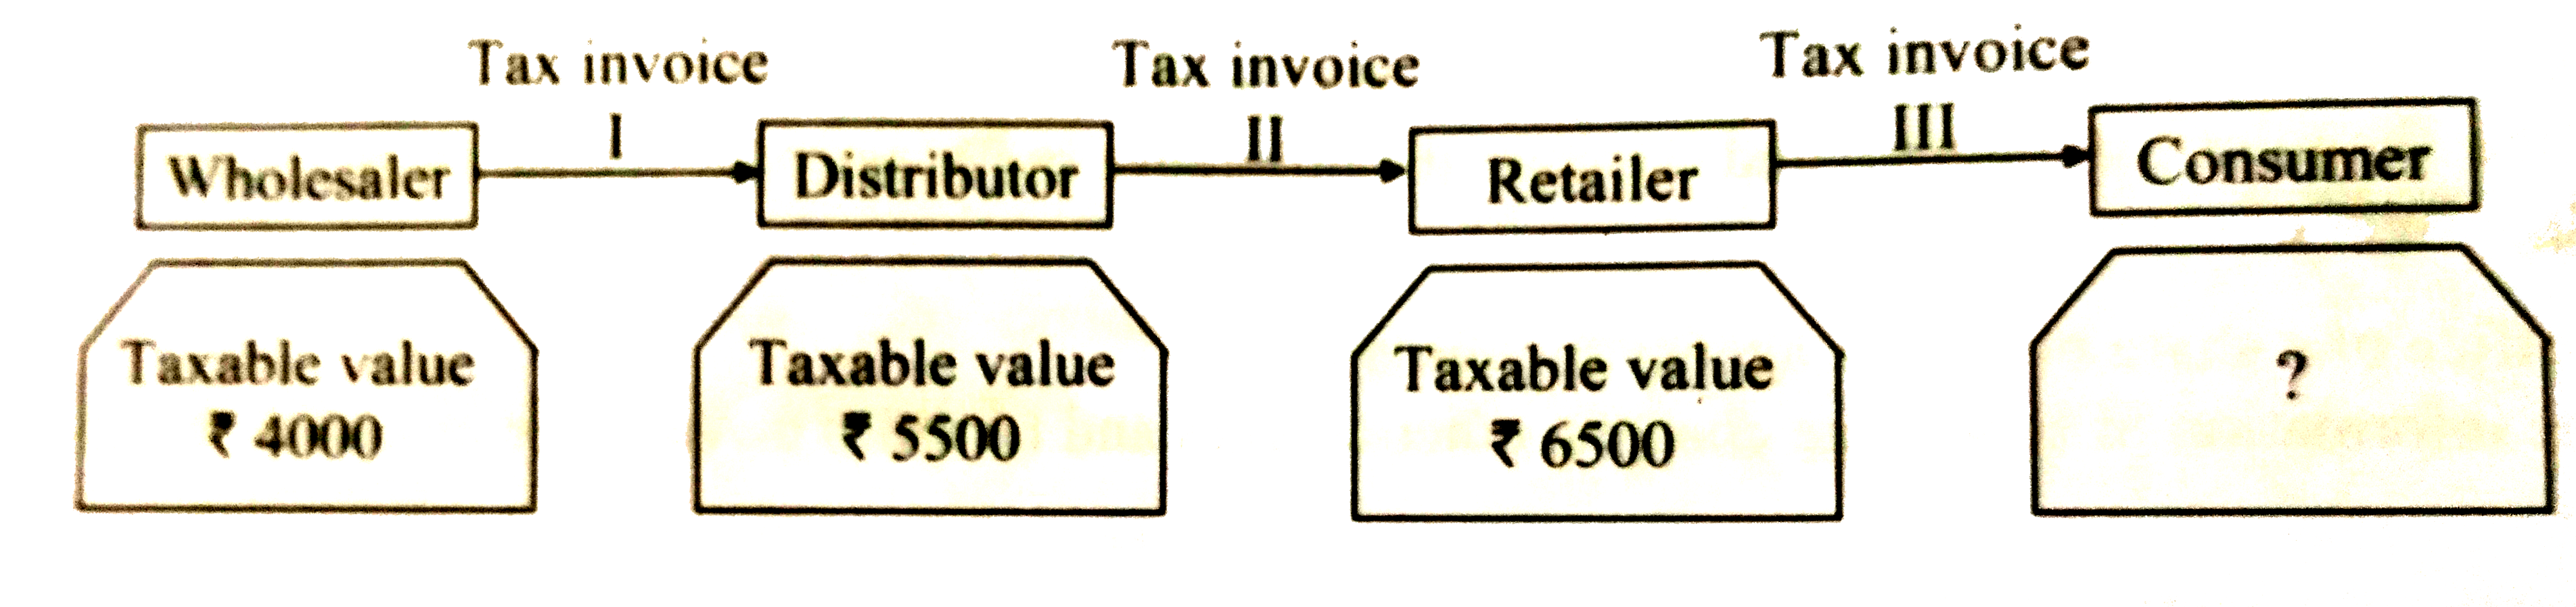 For the given trading prepare the tax invoice I, II, III. GST at the rate   of 5% was charged for the article supplied      (a) Prepare the statement of GST payable under each head by the wholesaler, distributor and retailer at the time of filling the return to the government.   (b) What is the amount paid by the consumer.